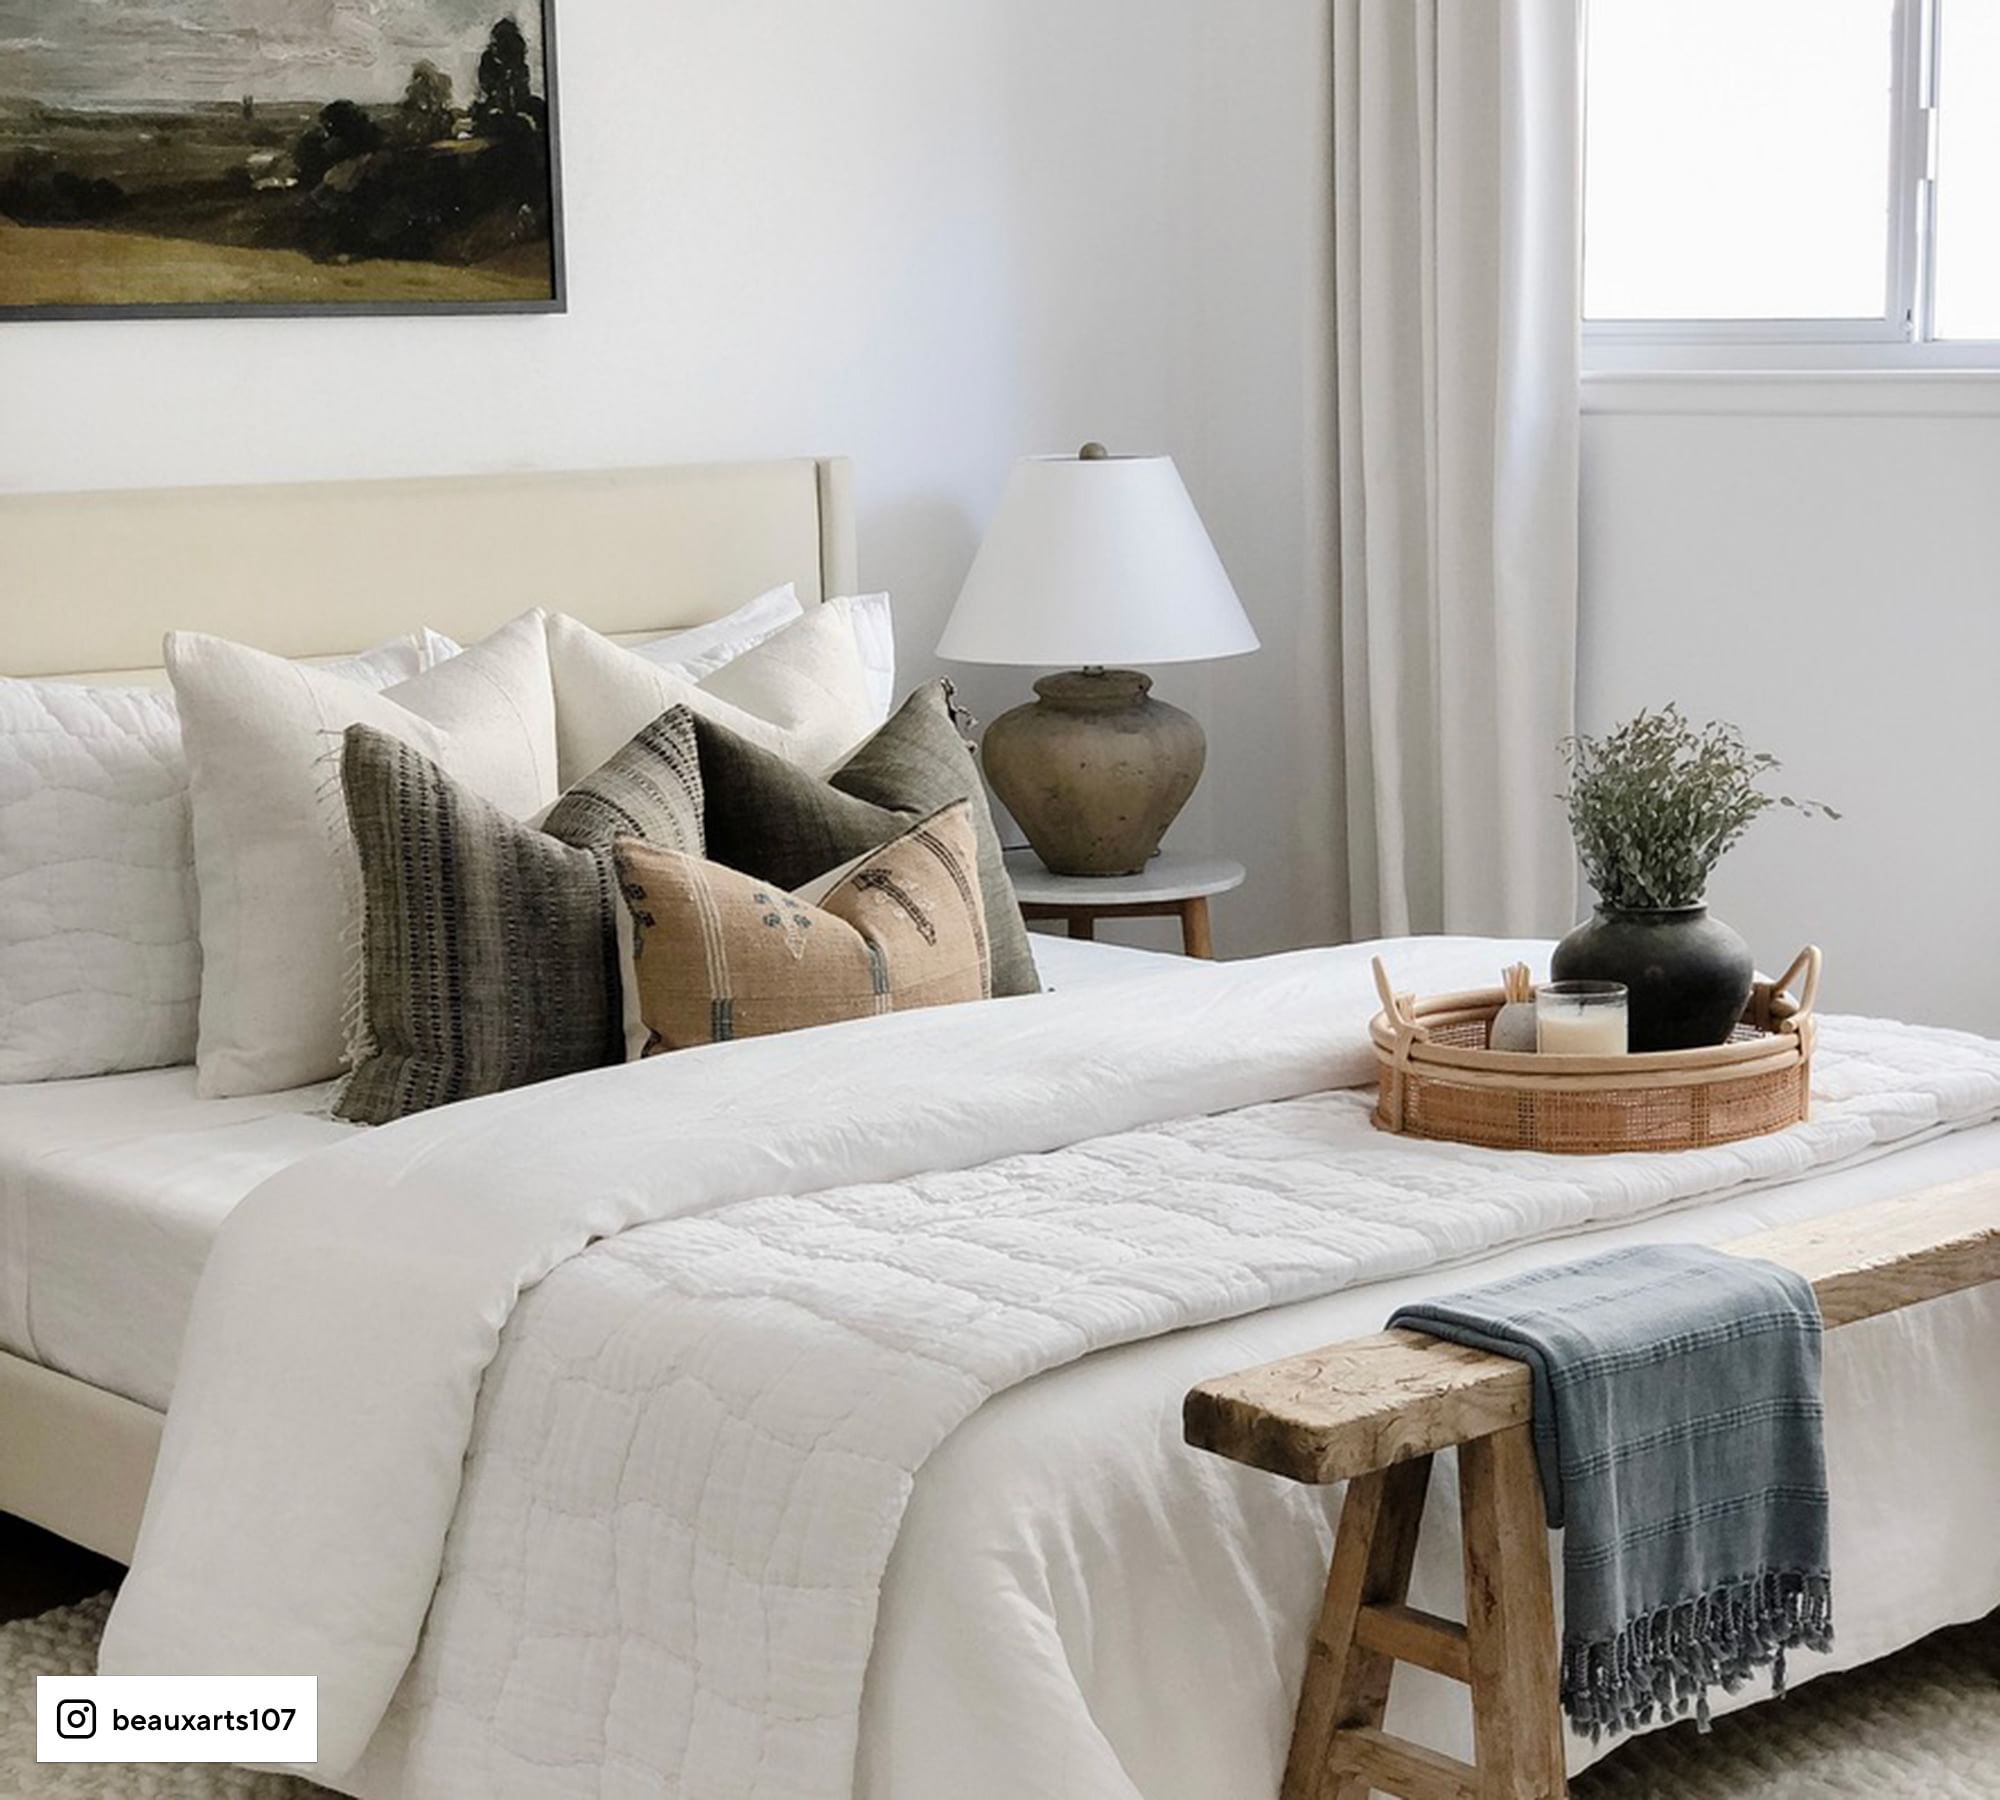 white bedding, cream upholstered bed, wood bench at end of bed with blue throw blanket